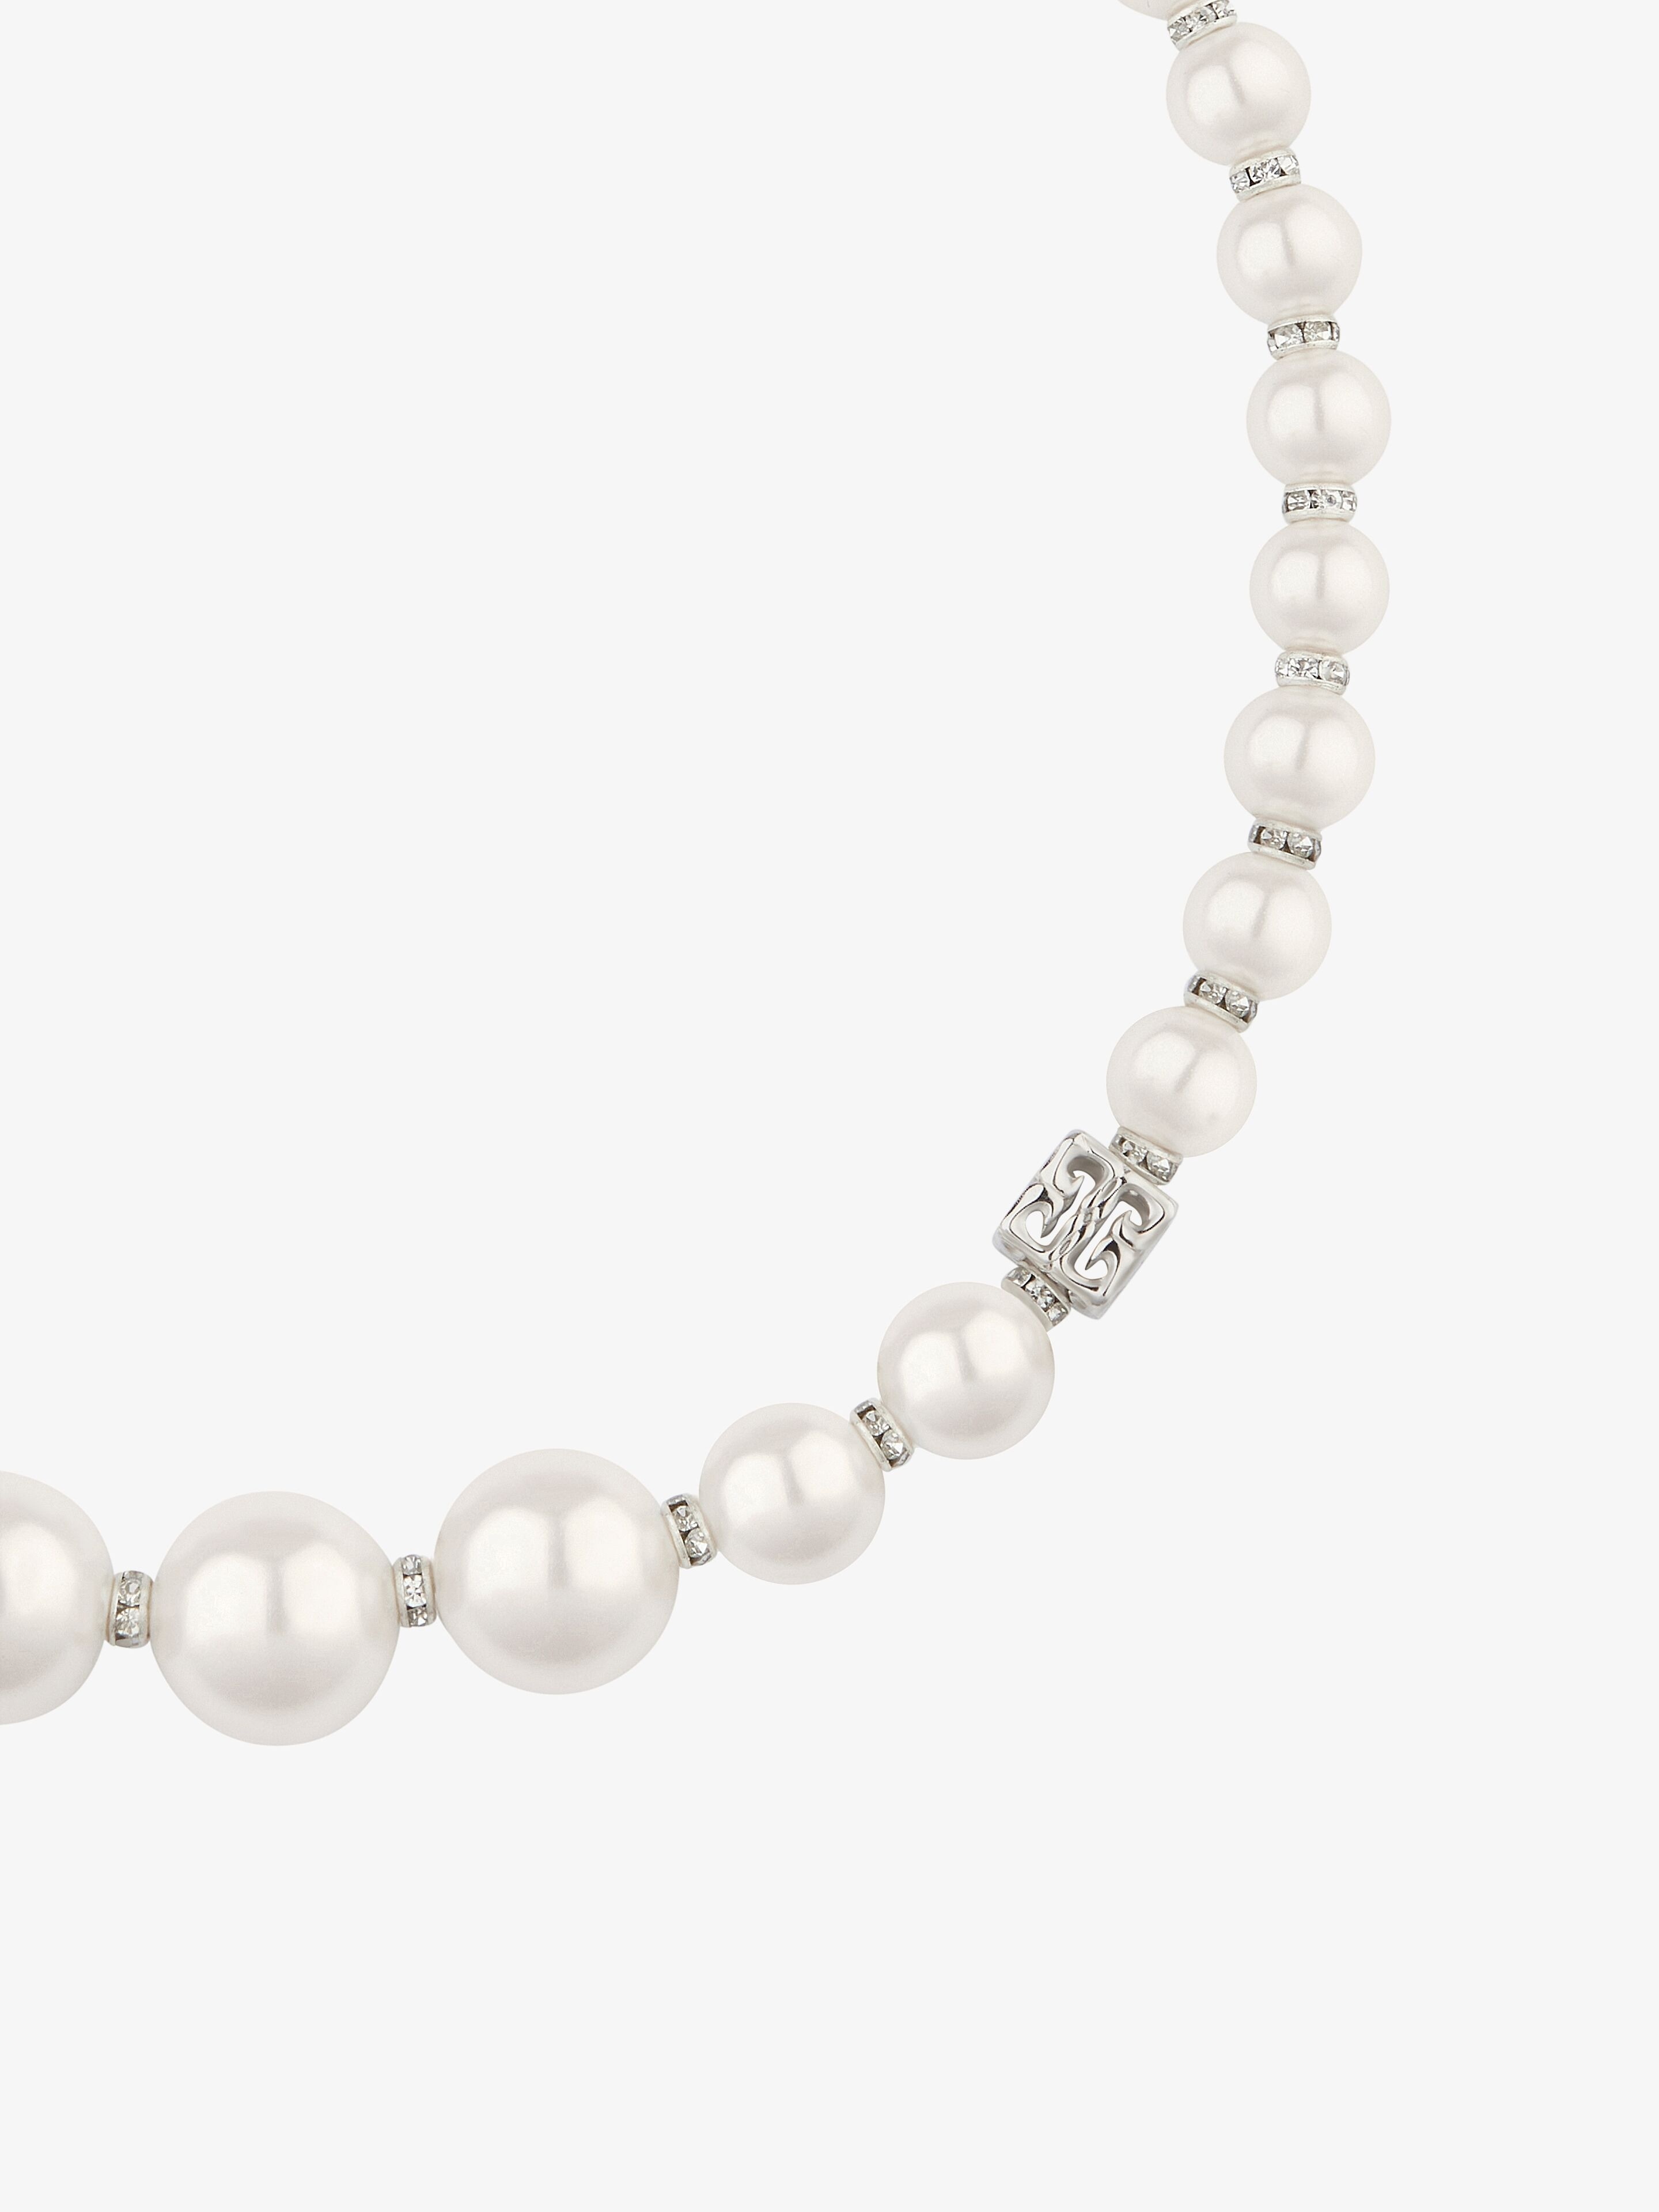 PEARL NECKLACE IN METAL WITH CRYSTALS - 2